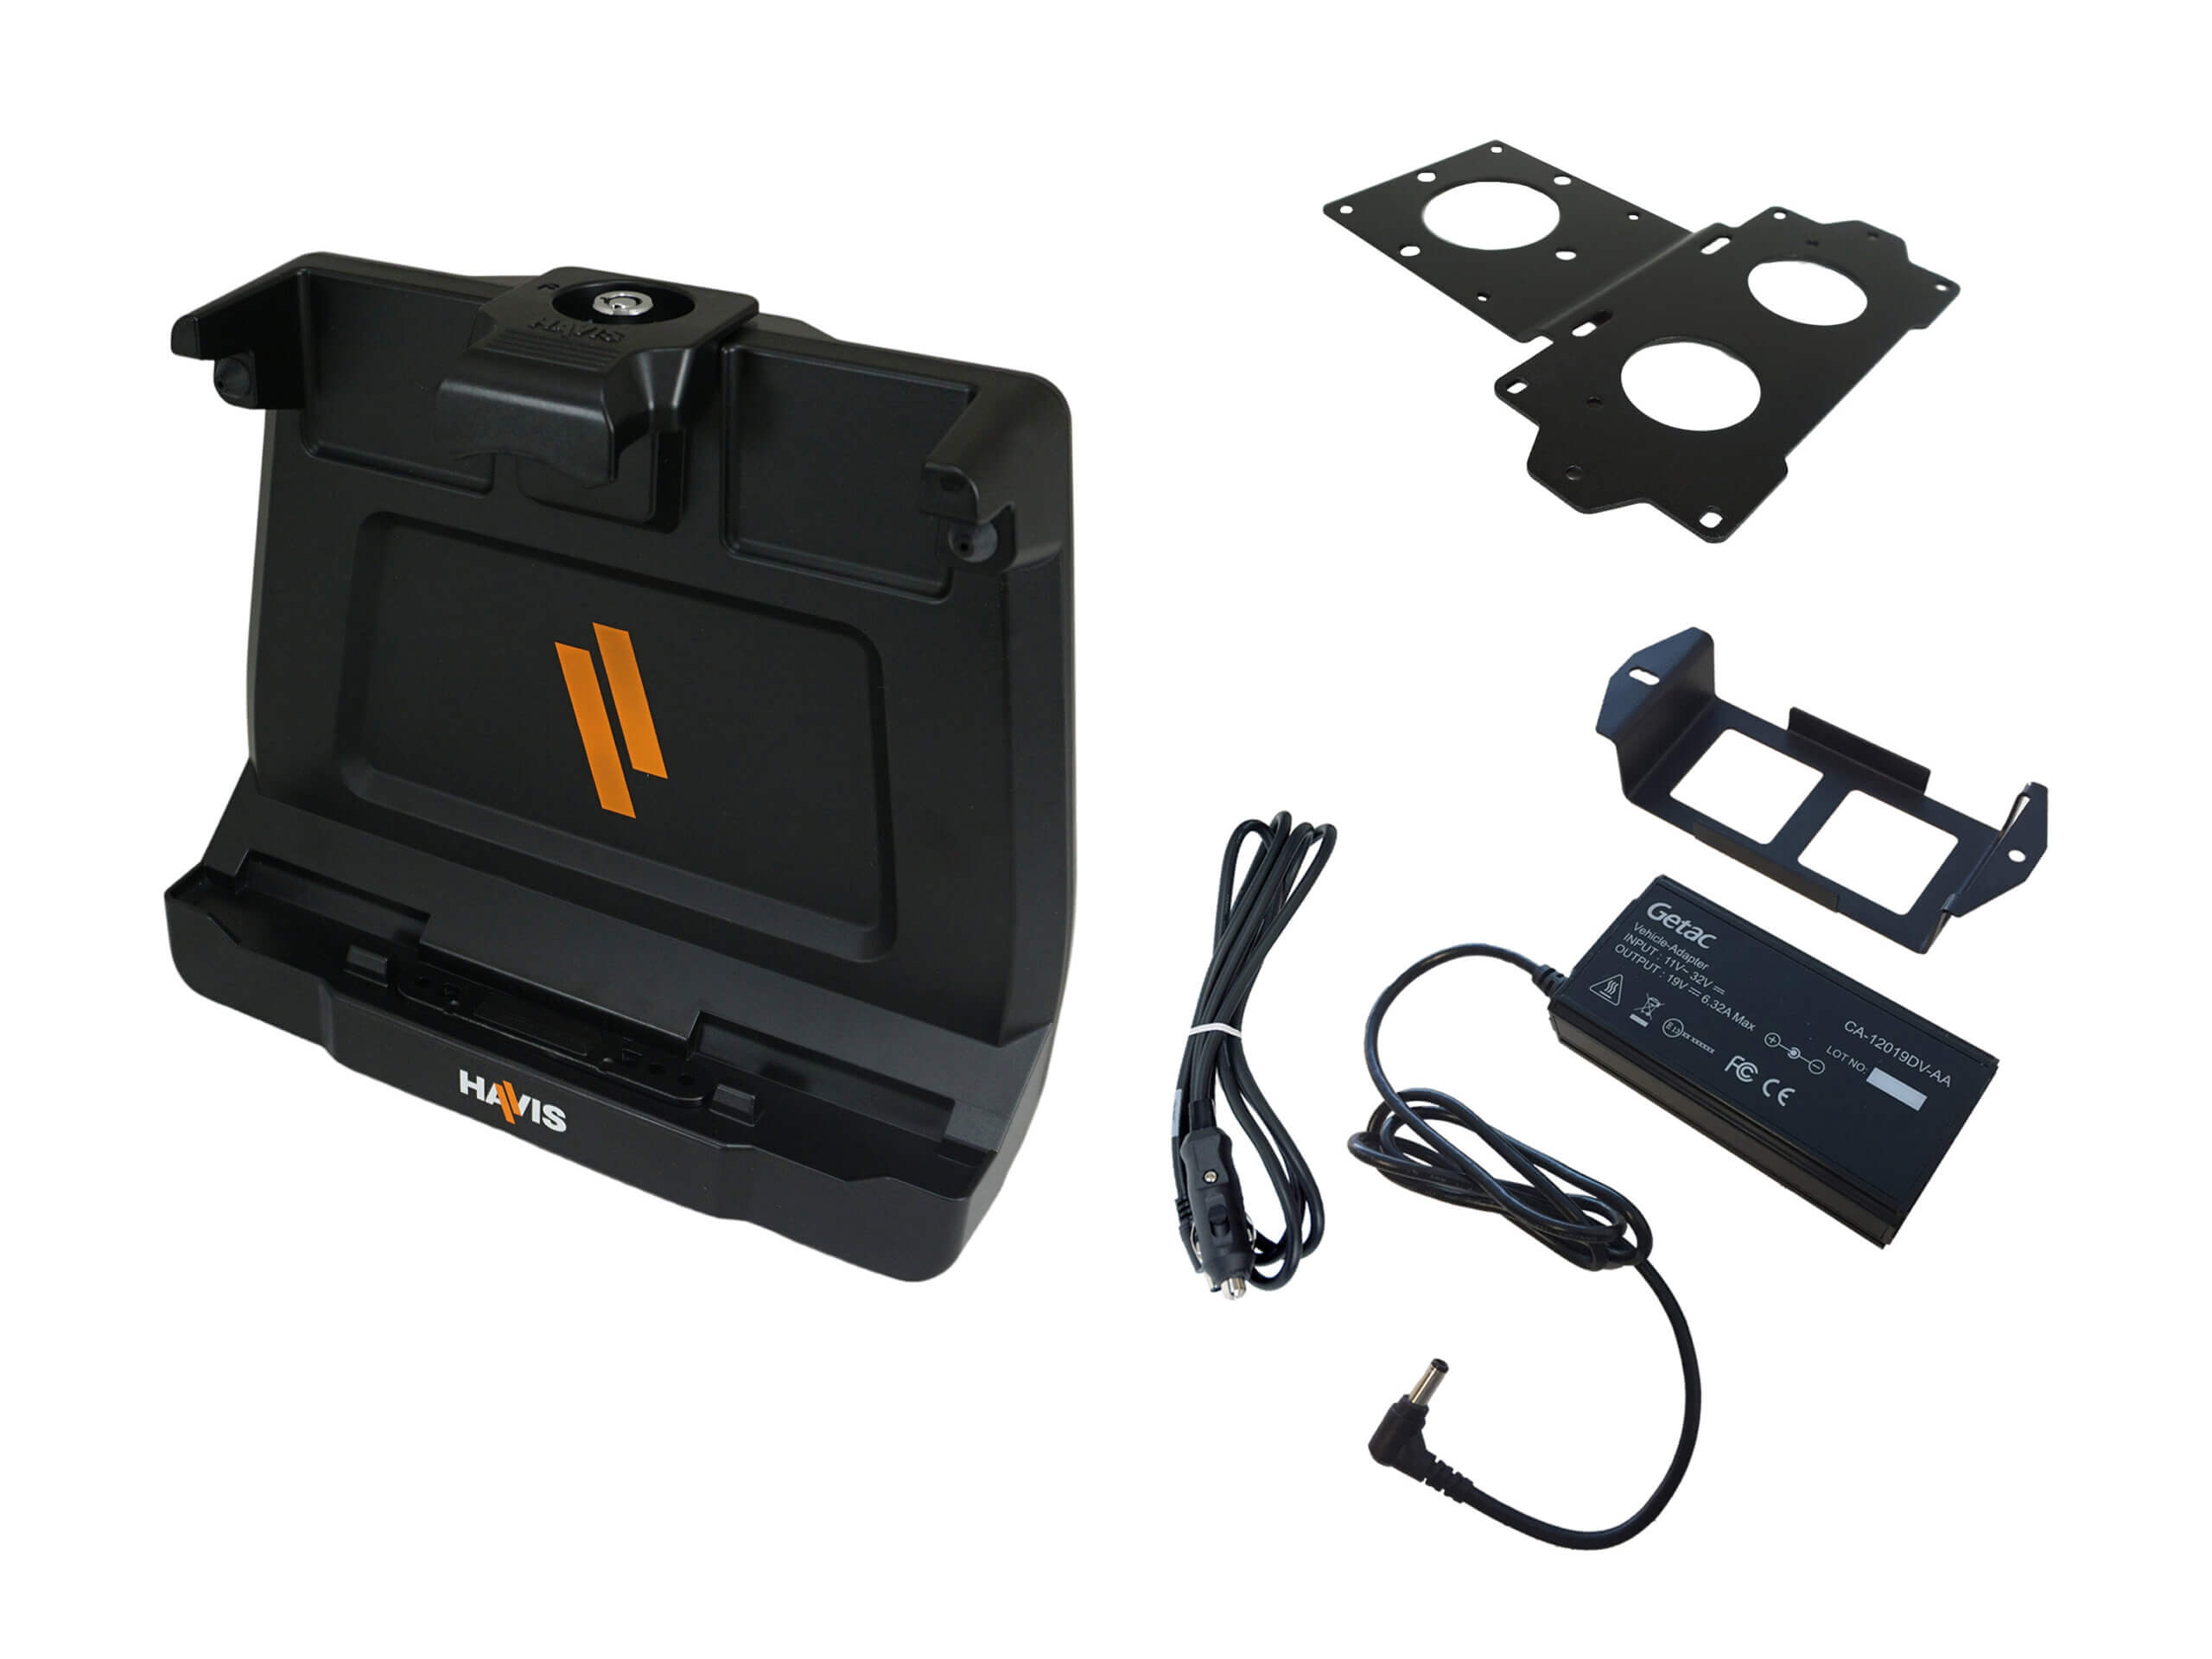 Package – Cradle for Getac ZX10 Tablet With External Power Supply & Power Supply Mounting Bracket